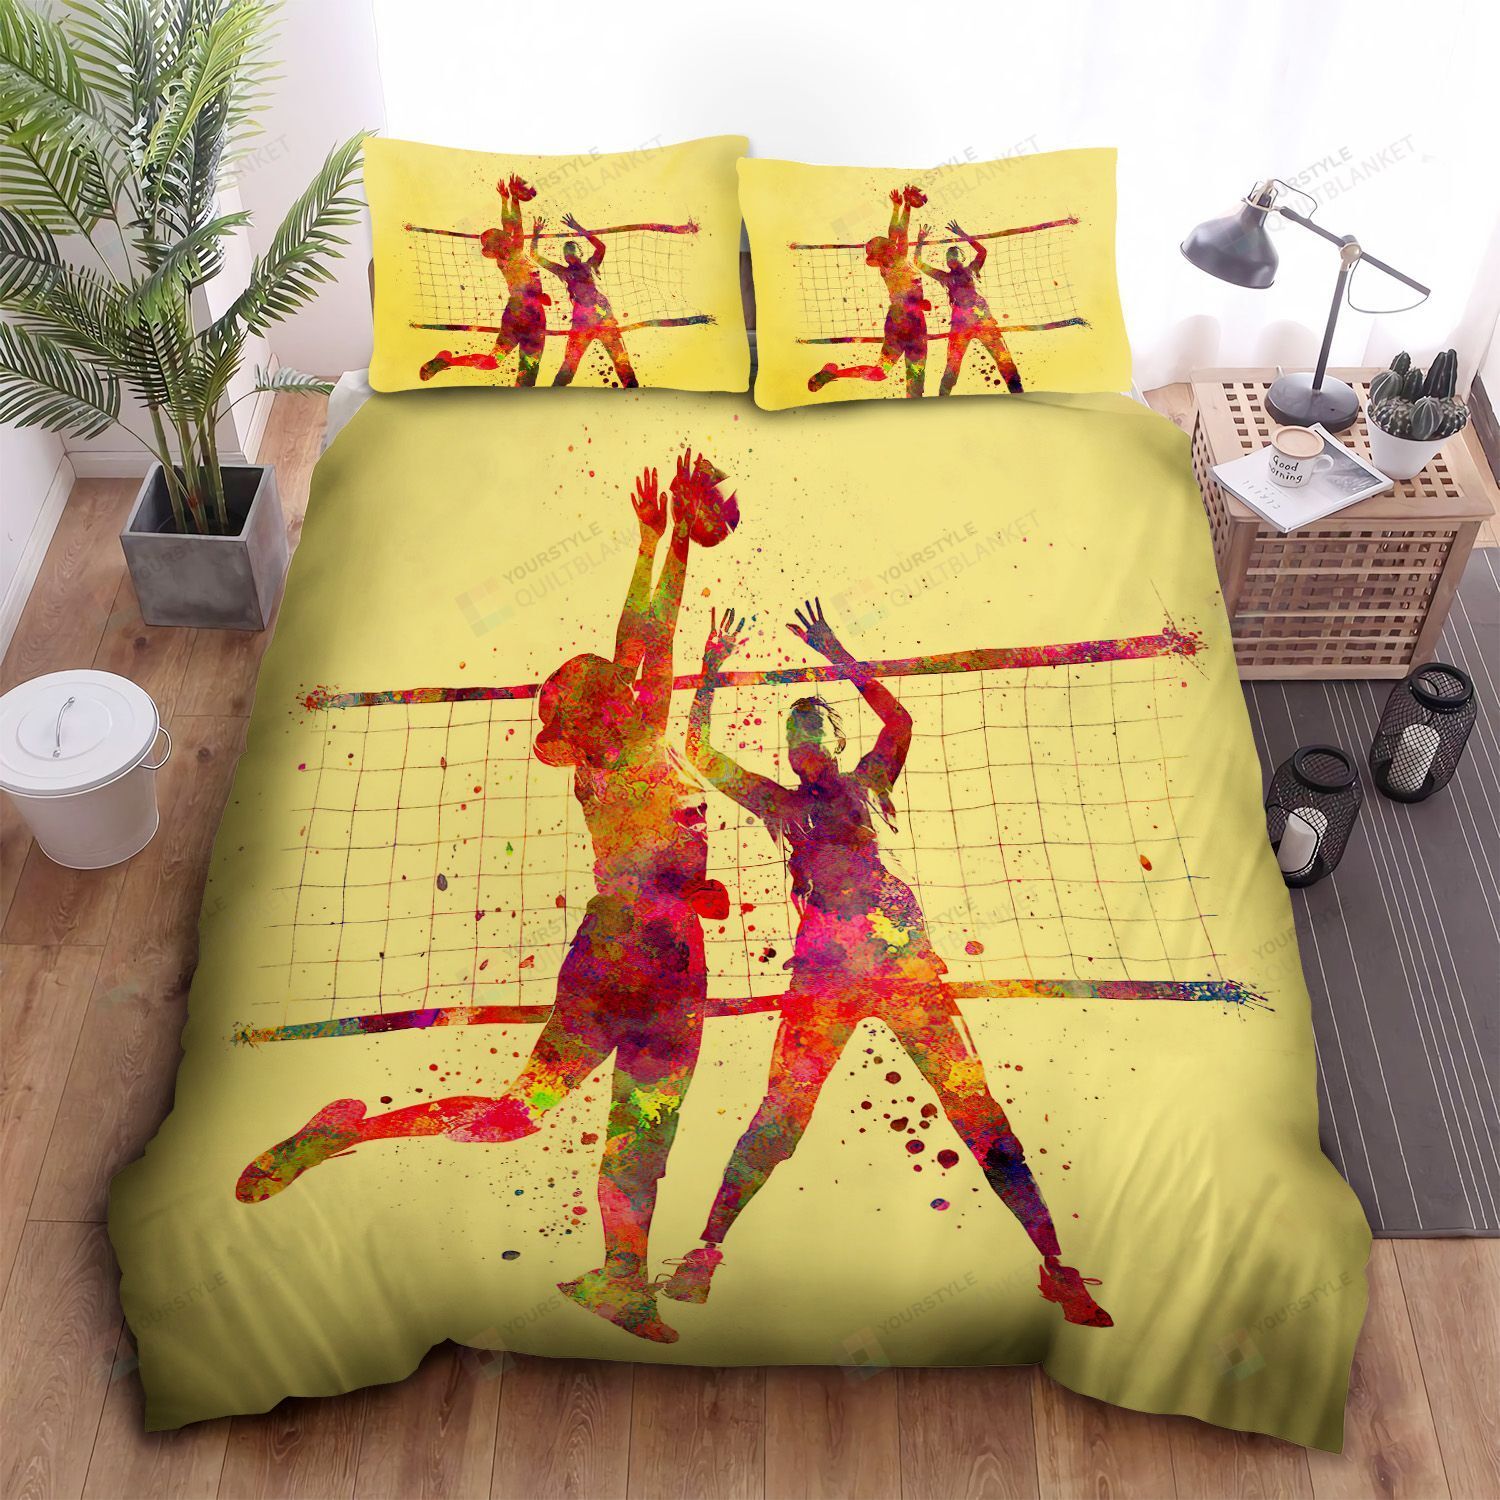 Volleyball Bed Sheets Spread Comforter Duvet Cover Bedding Sets